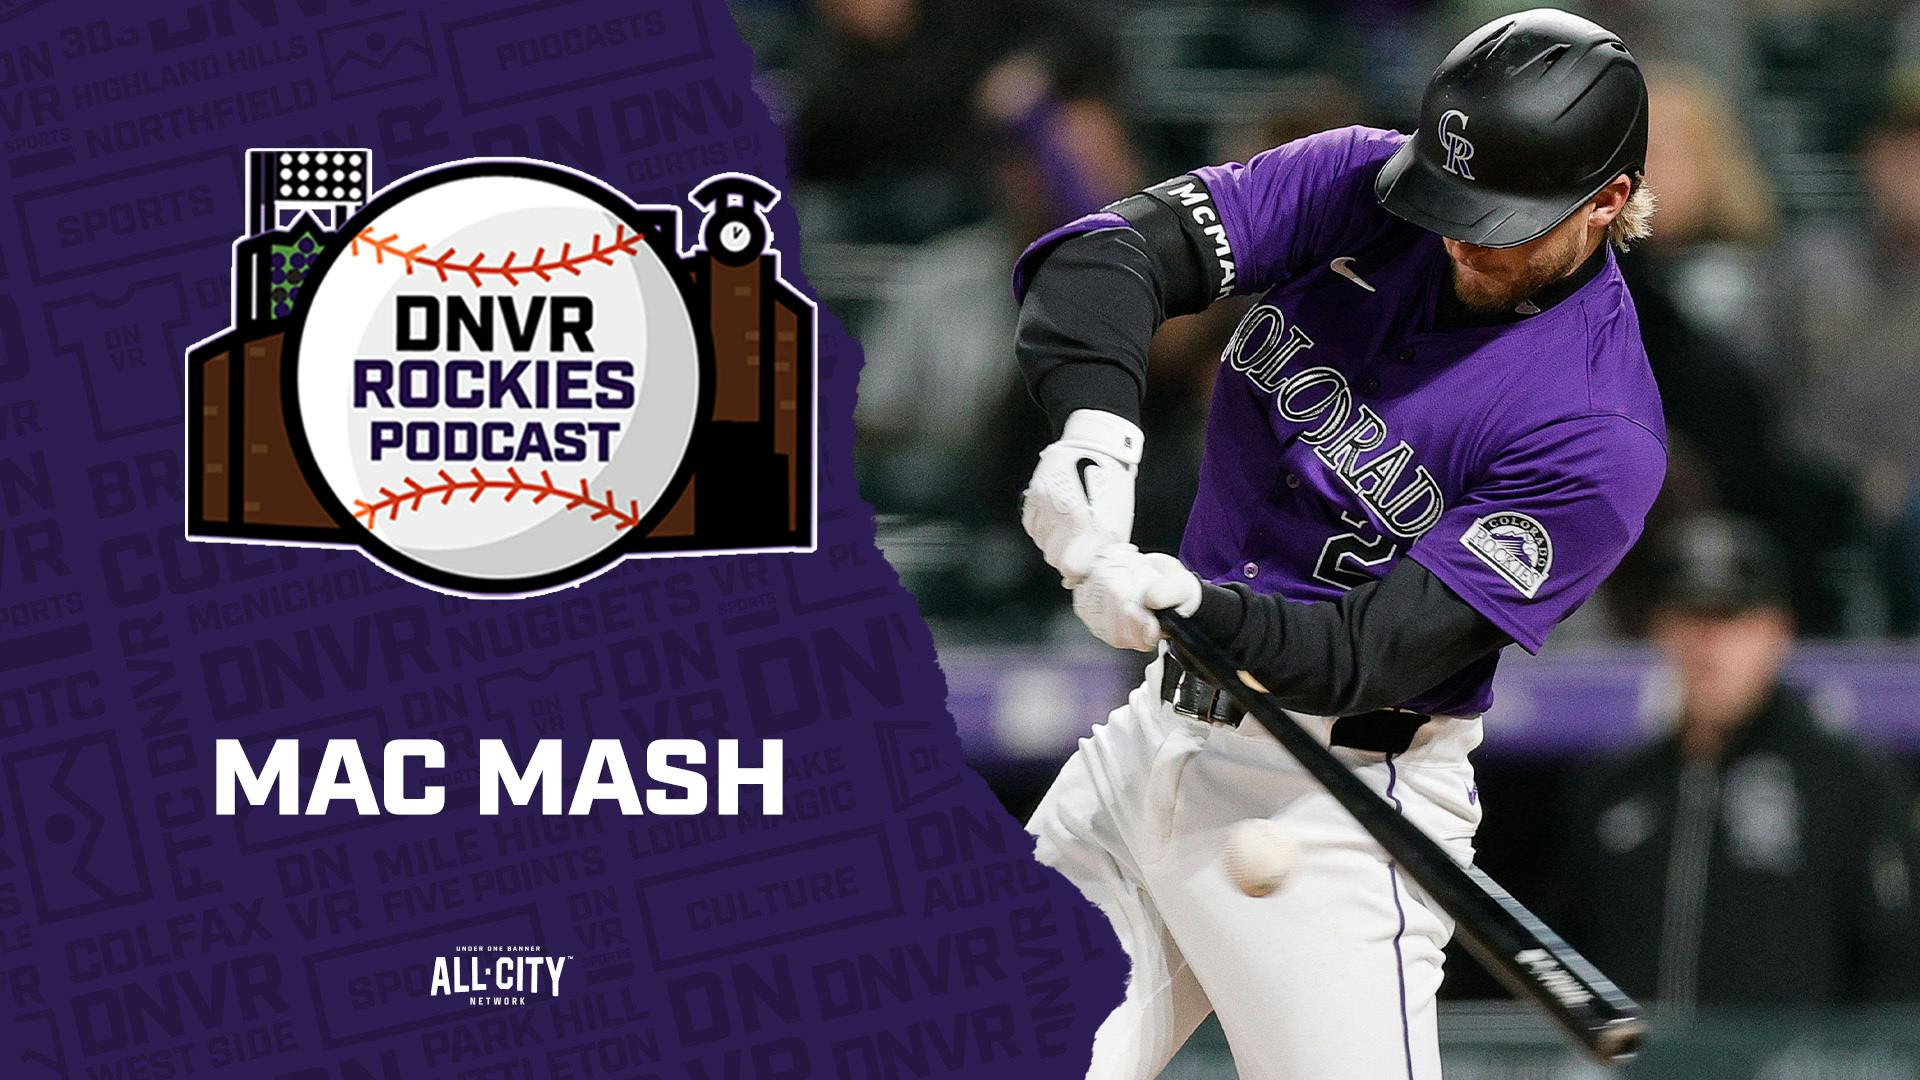 Series Wrap: Ryan McMahon is one of baseball’s top hitters after Diamondbacks series | DNVR Rockies Podcast